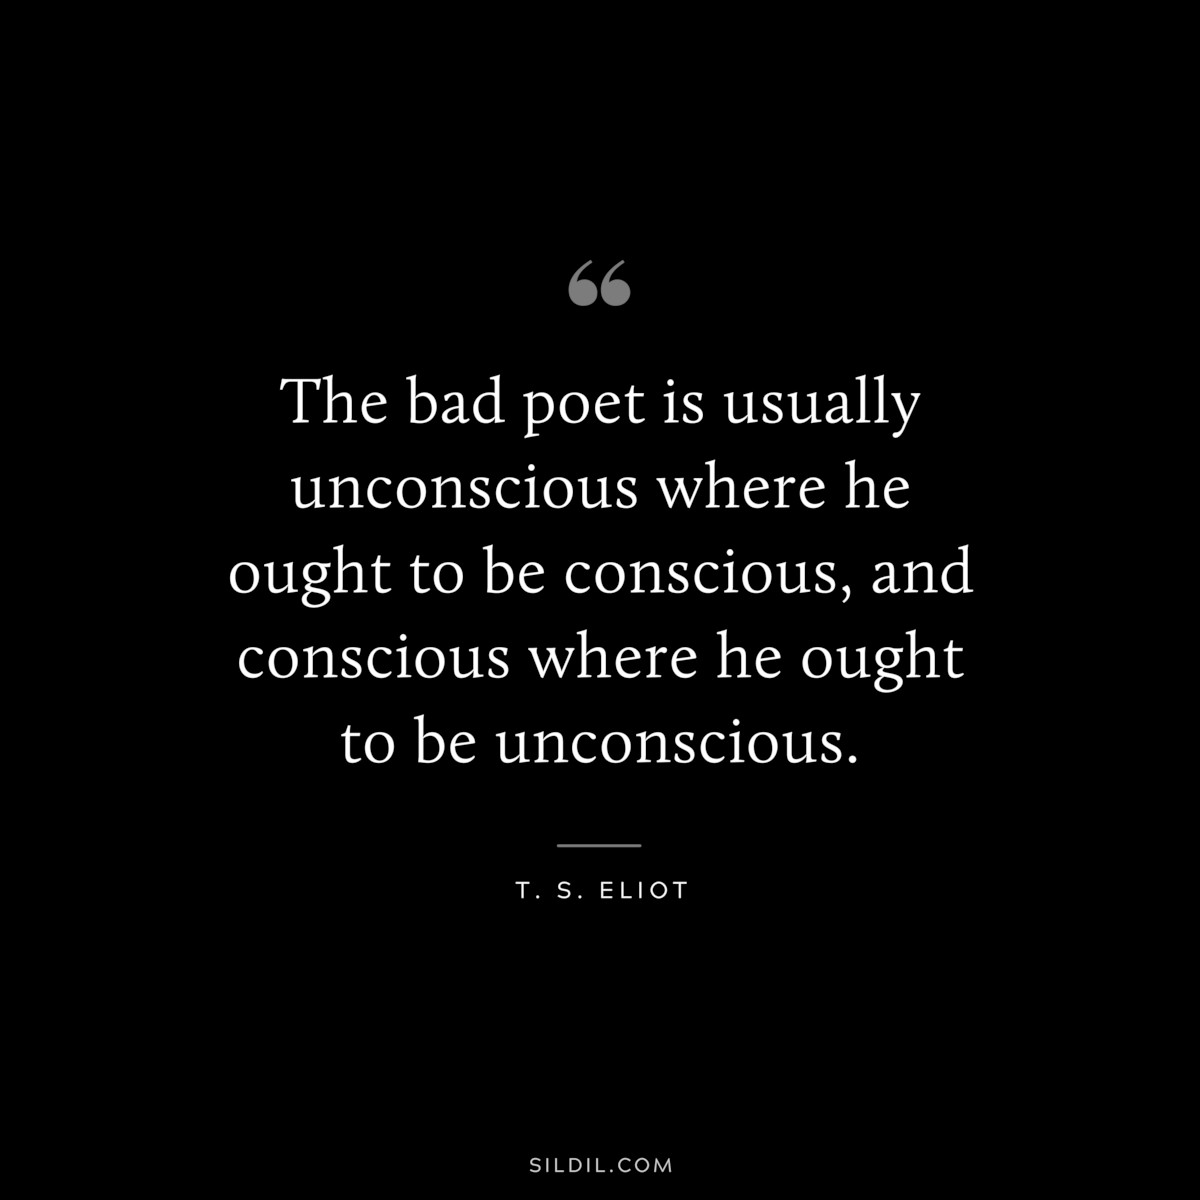 The bad poet is usually unconscious where he ought to be conscious, and conscious where he ought to be unconscious. ― T. S. Eliot